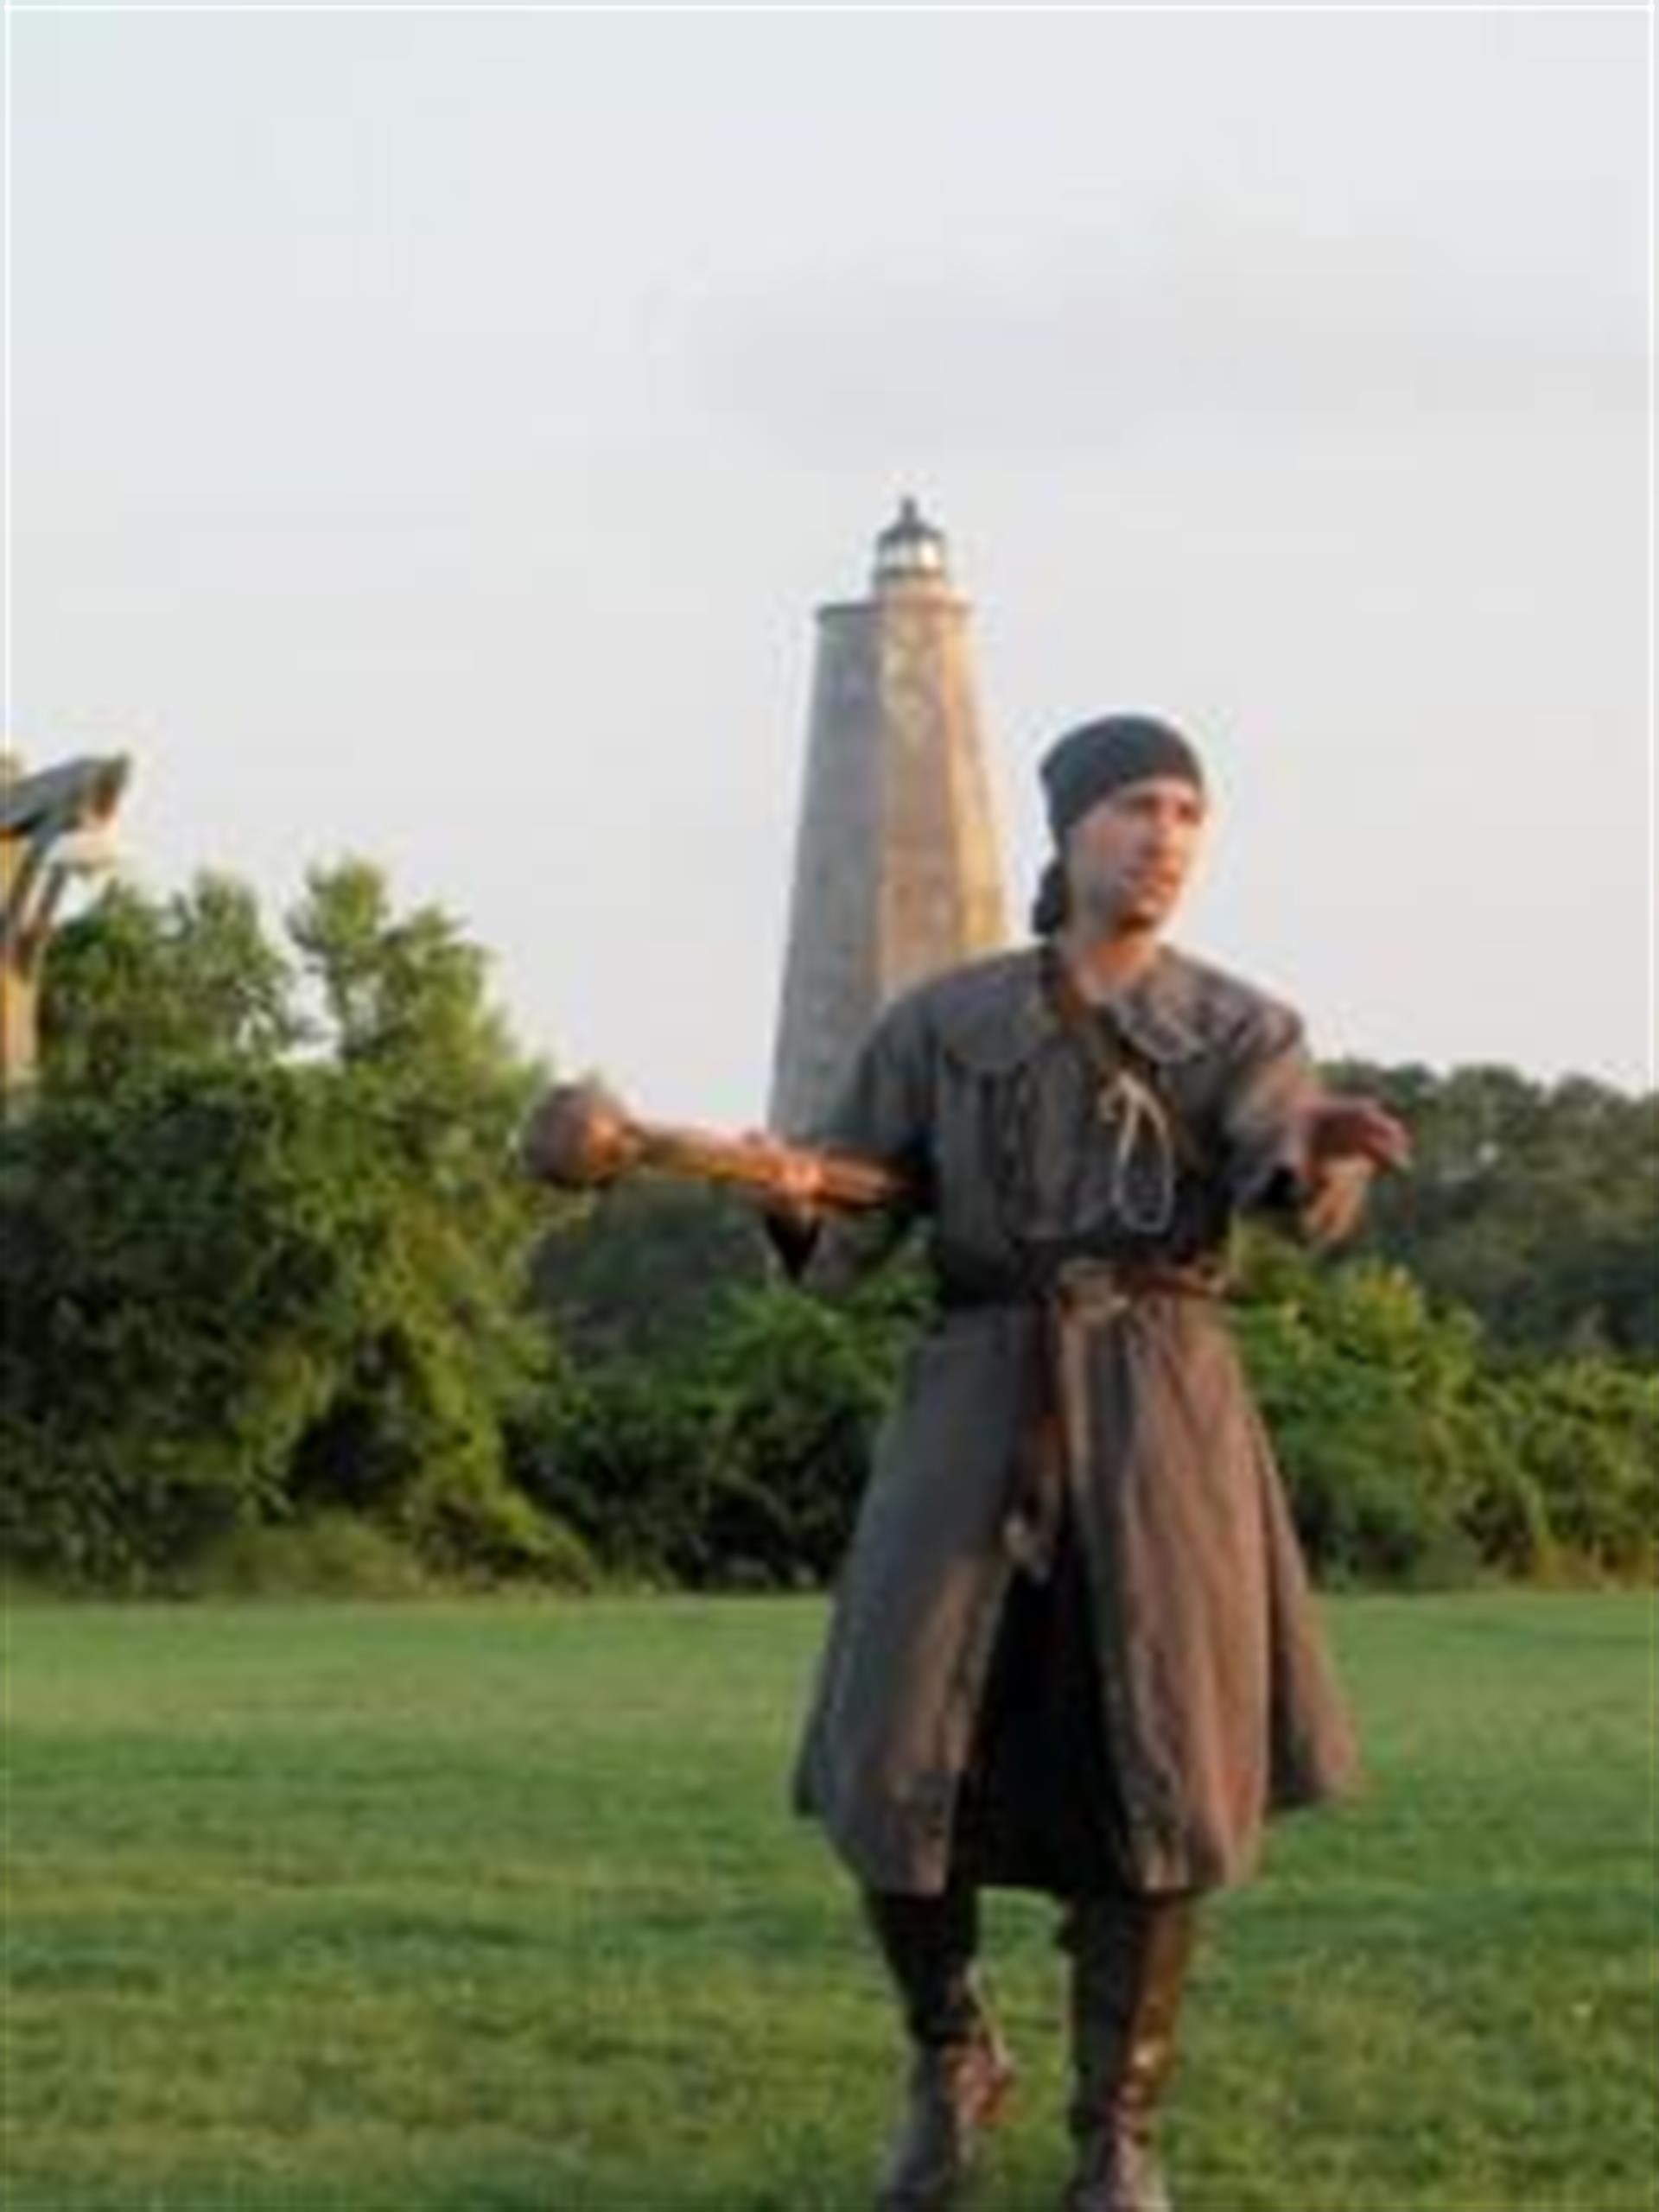 Colonel Dread starts the Ghost Walk in front of Old Baldy.